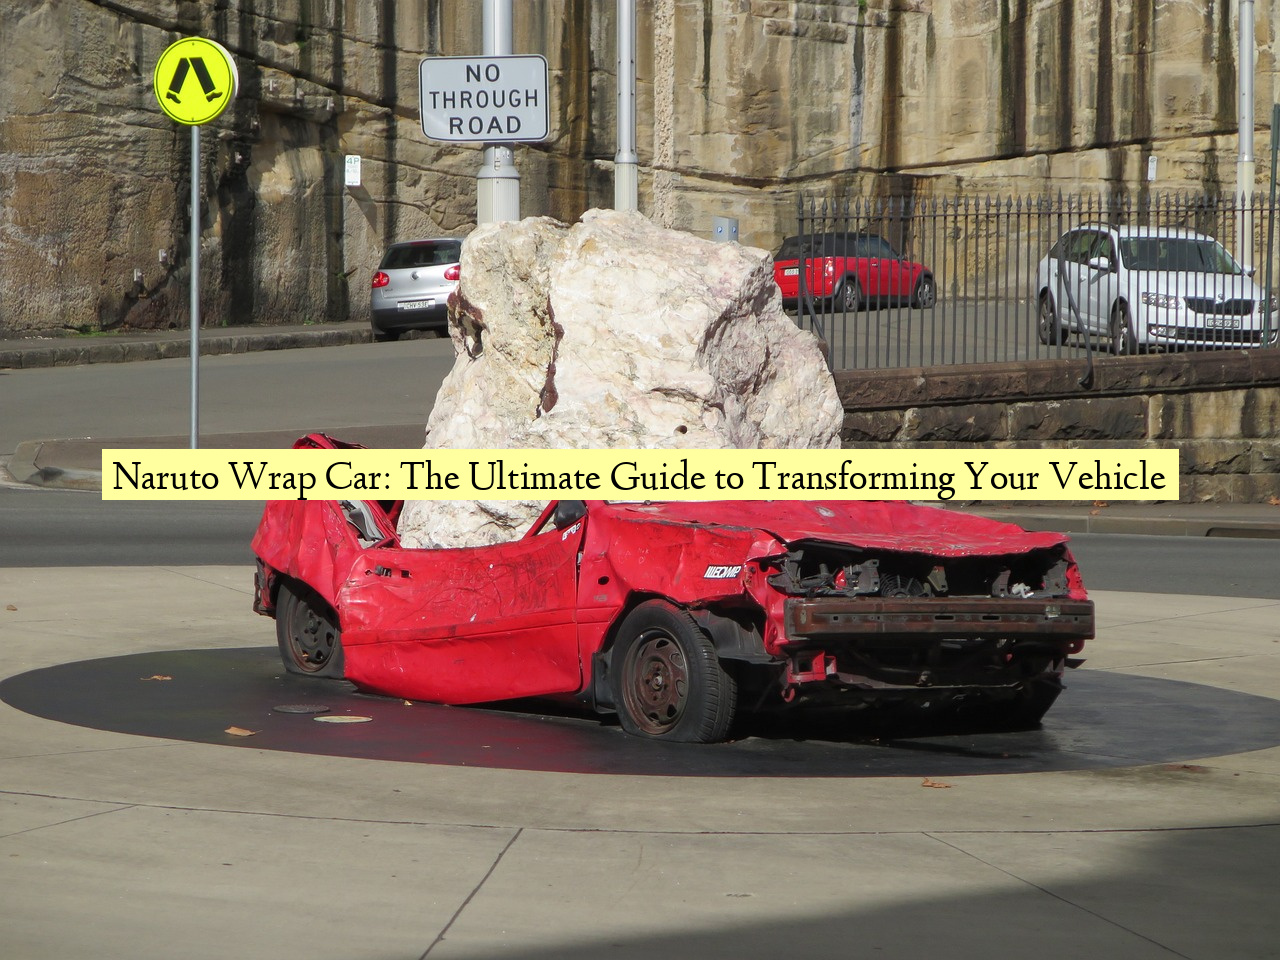 Naruto Wrap Car: The Ultimate Guide to Transforming Your Vehicle